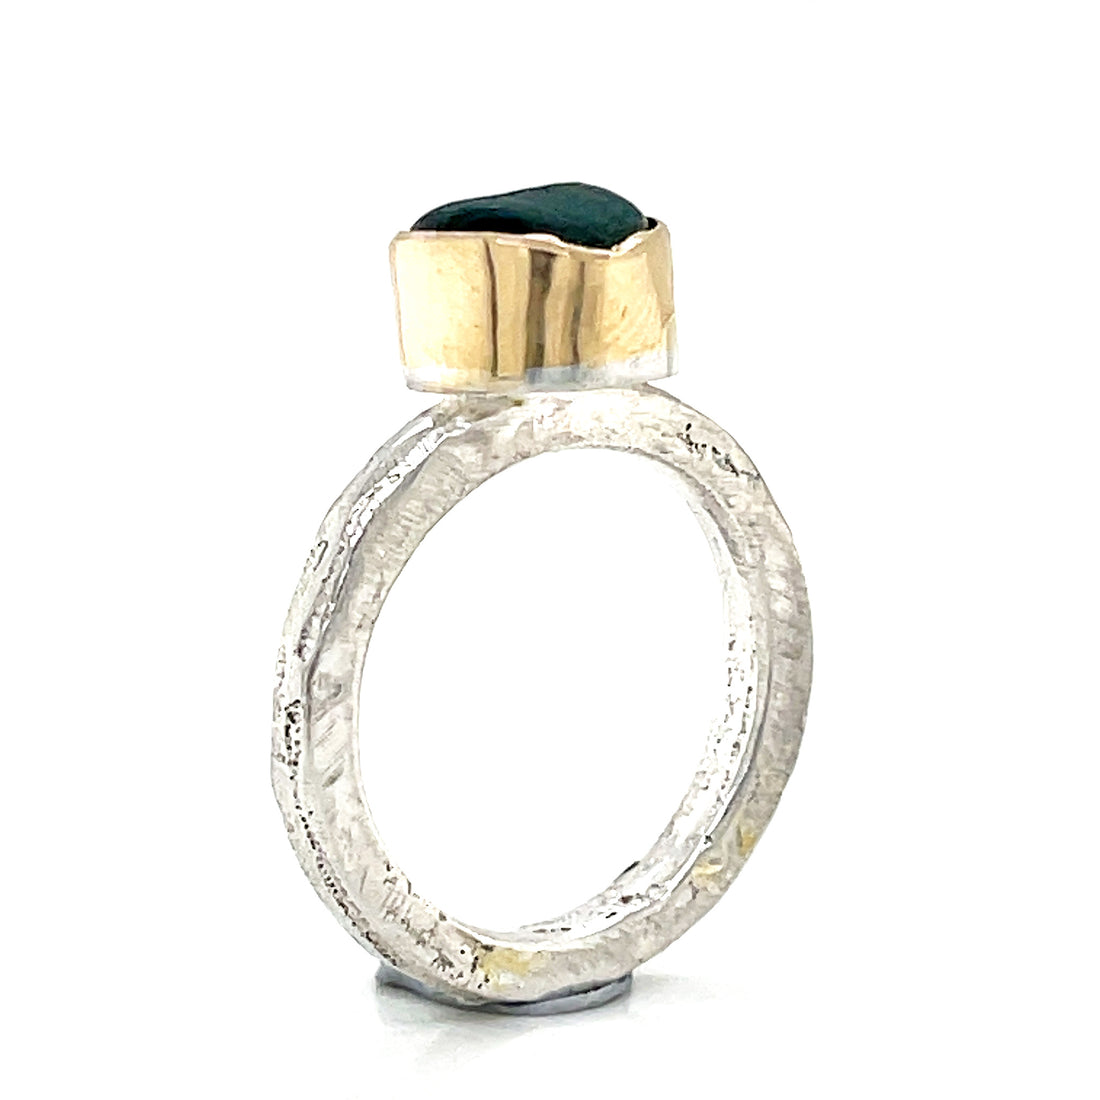 nd gold ring, emerald green ring sea glass jewellery